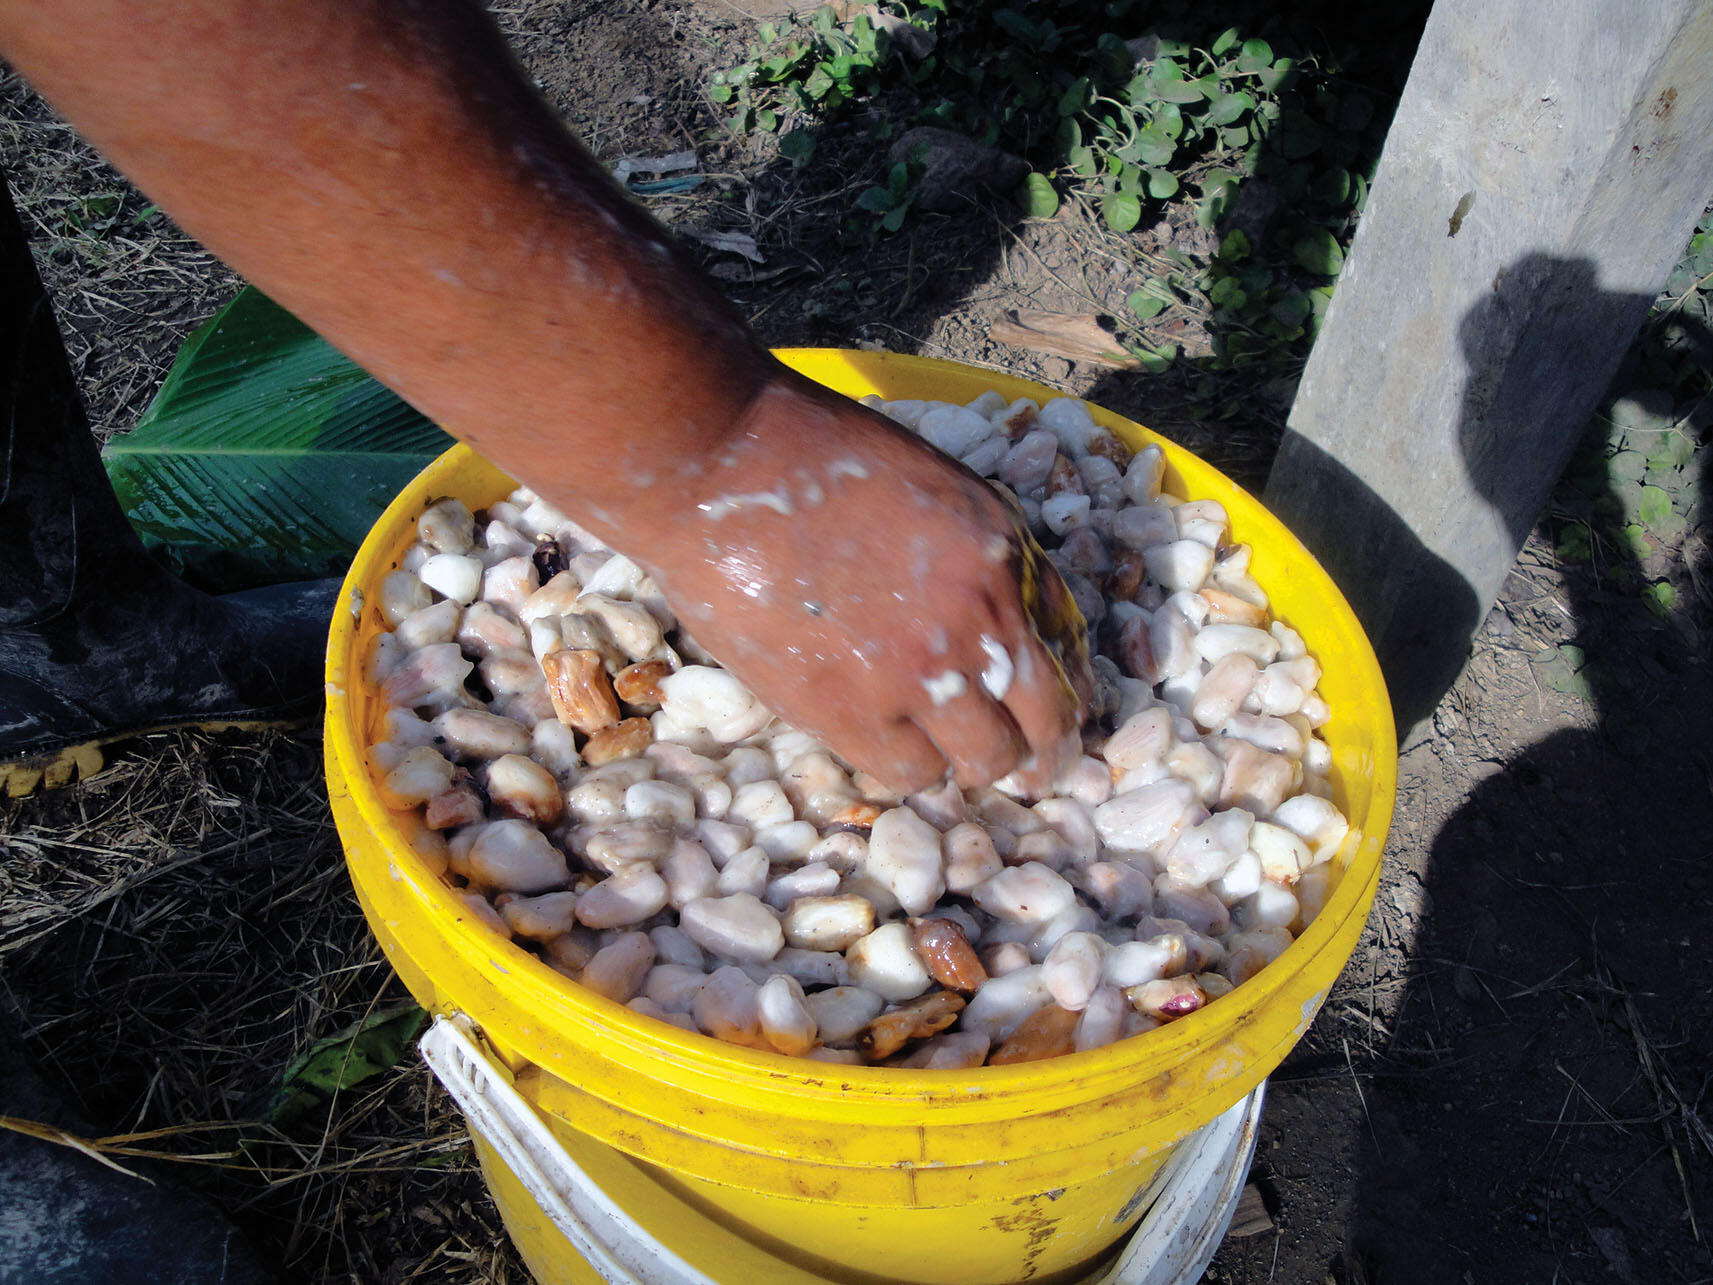 A woman riinses a bucket of cacao beans to remove impurities. (Photo by Sarah Krupp.)